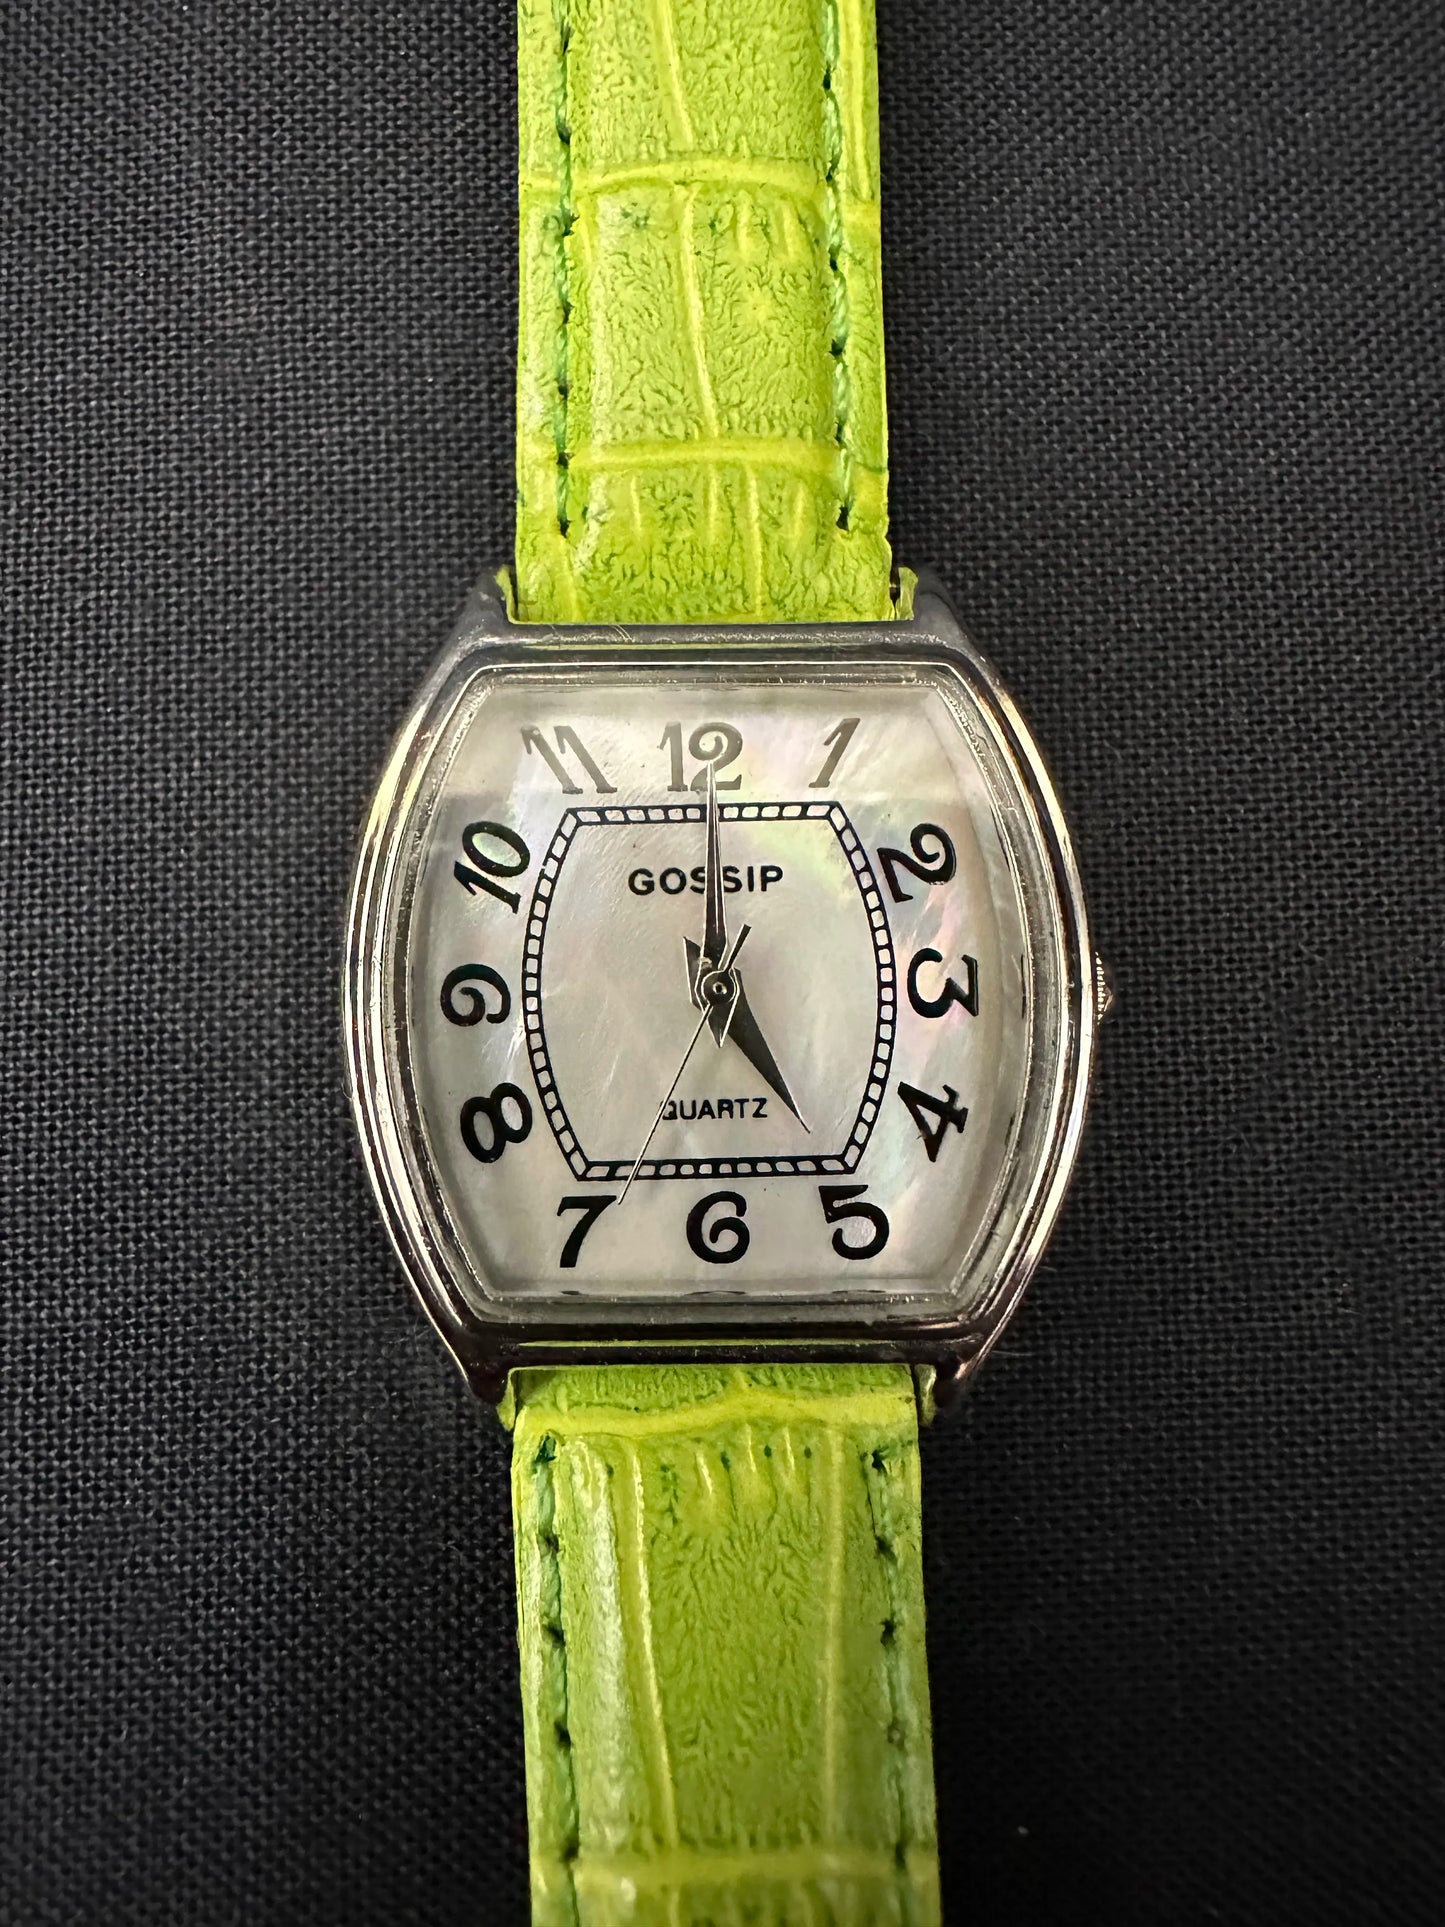 Gossip Watch with green band